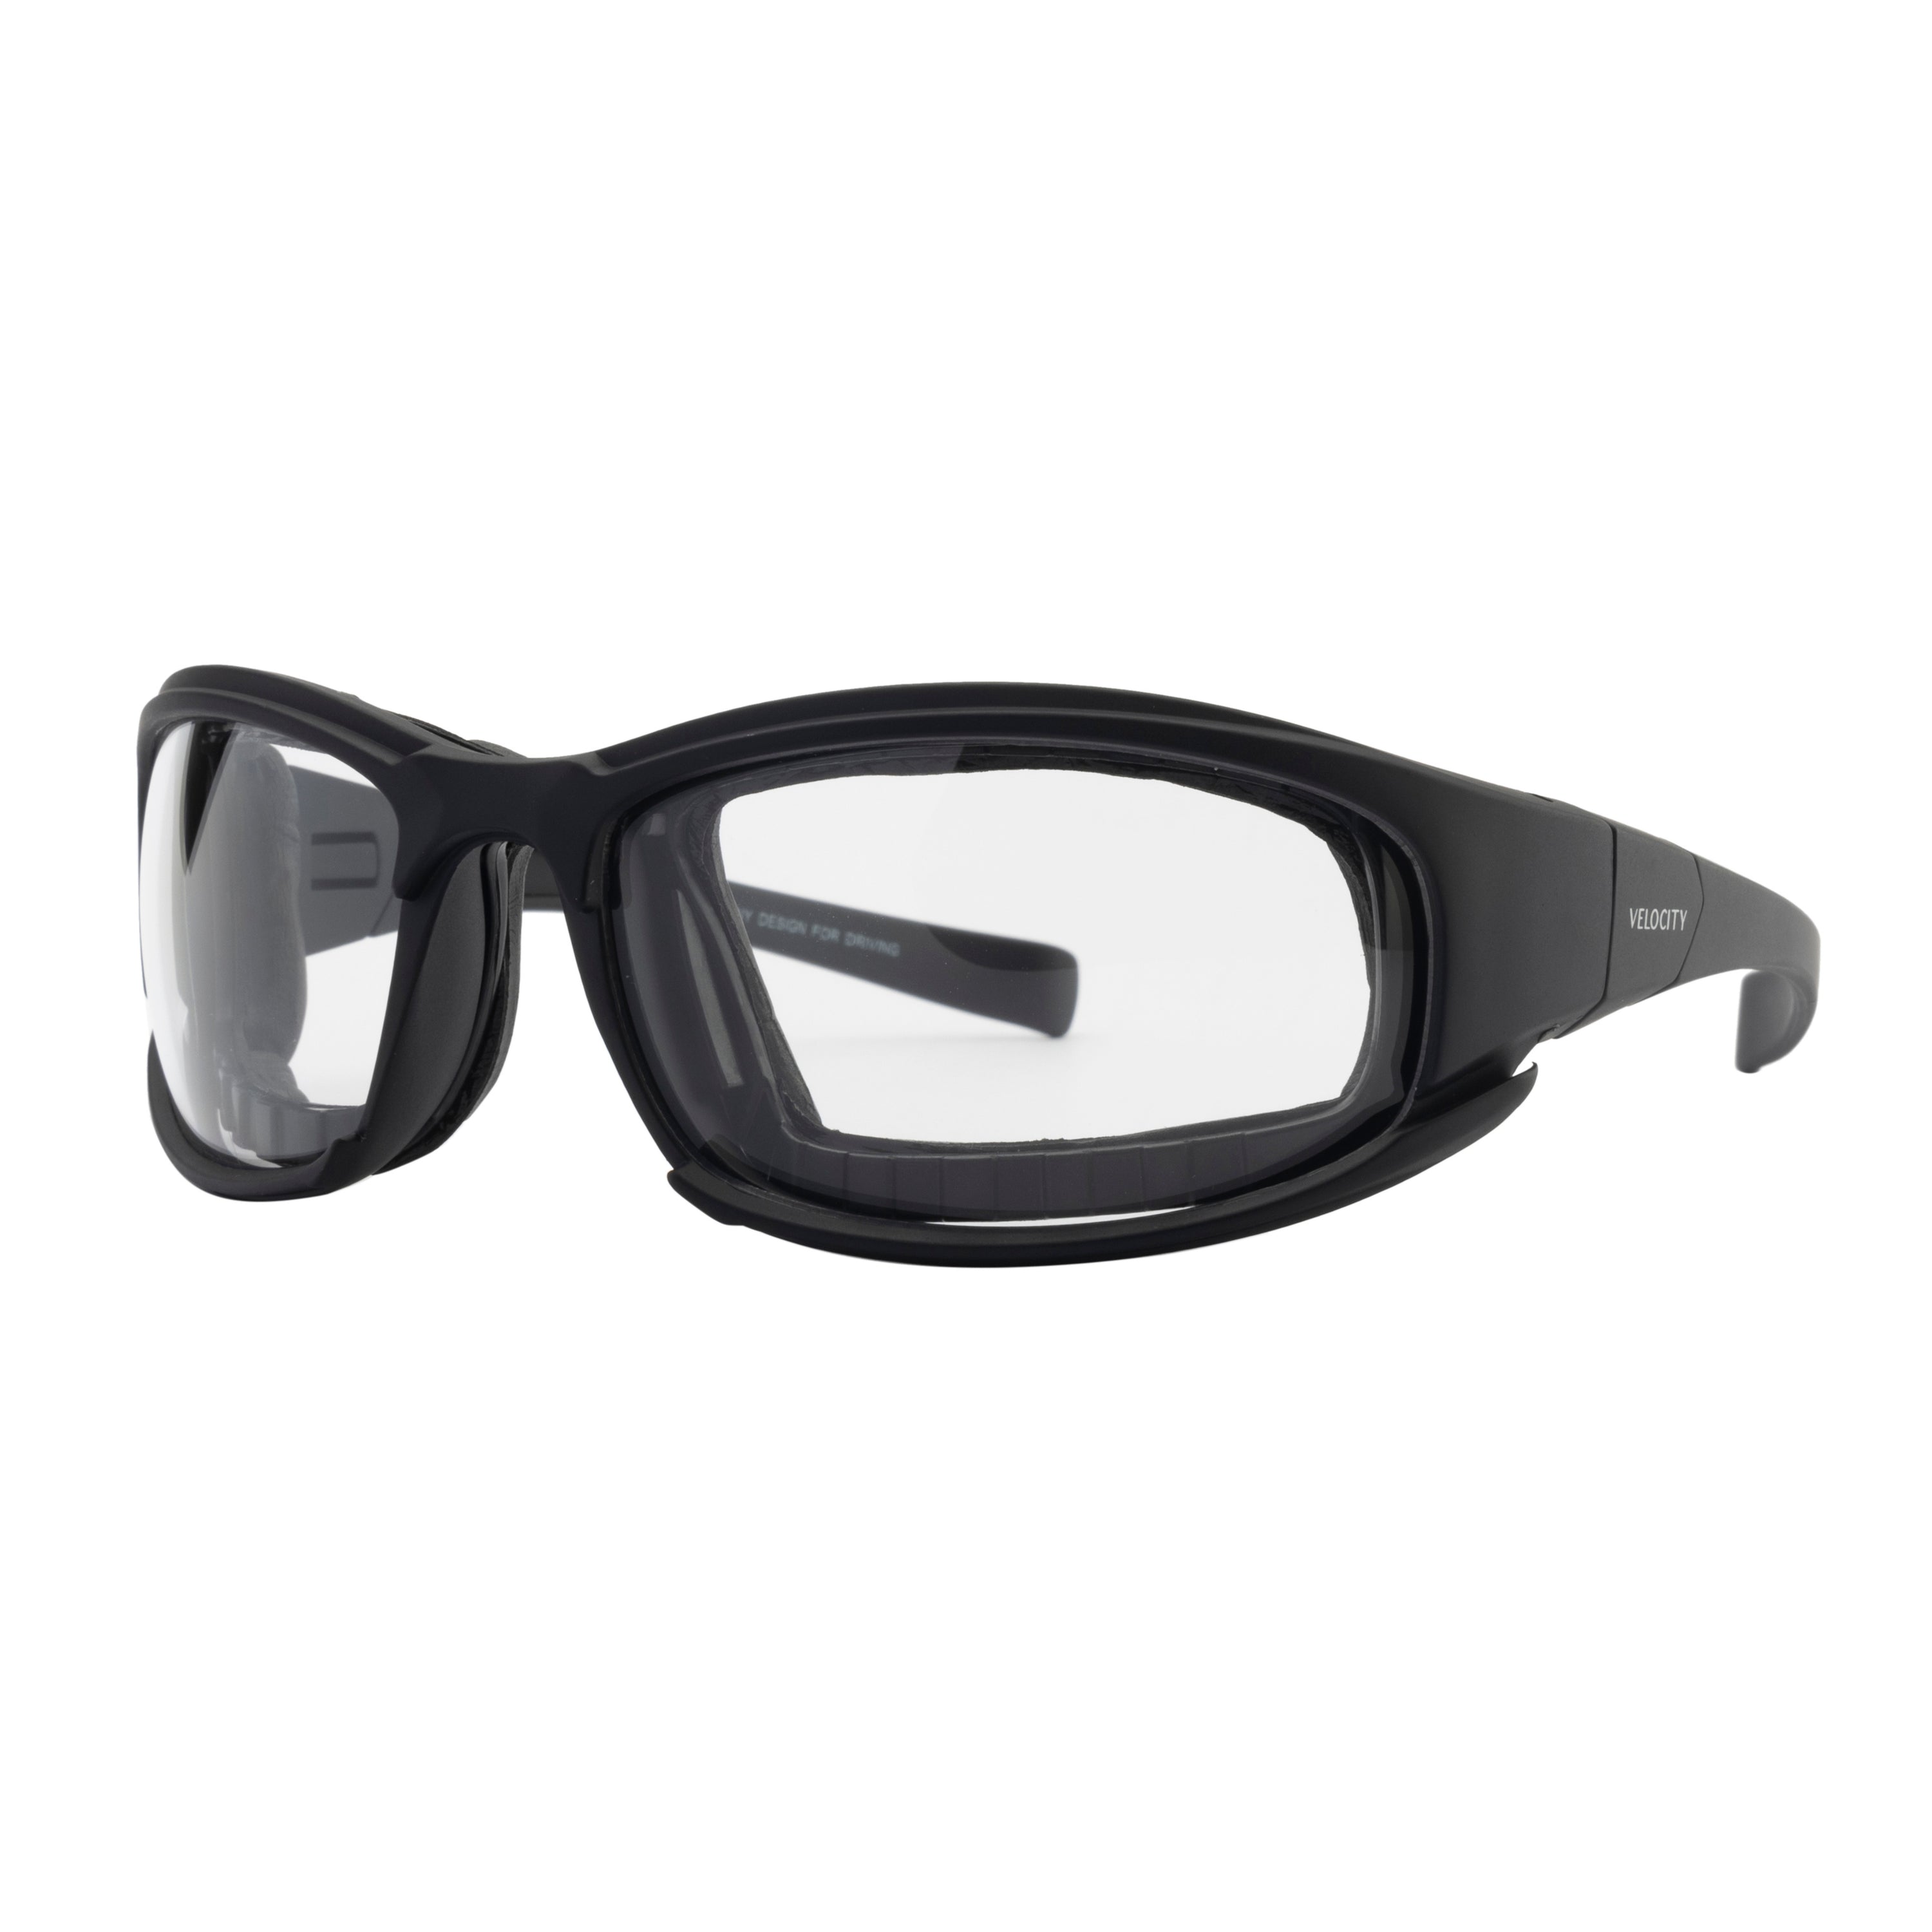 Velocity Riding Sports Sunglass | Driving Clear Vision | Car Driving | Bike Riding Glasses - 781-D1